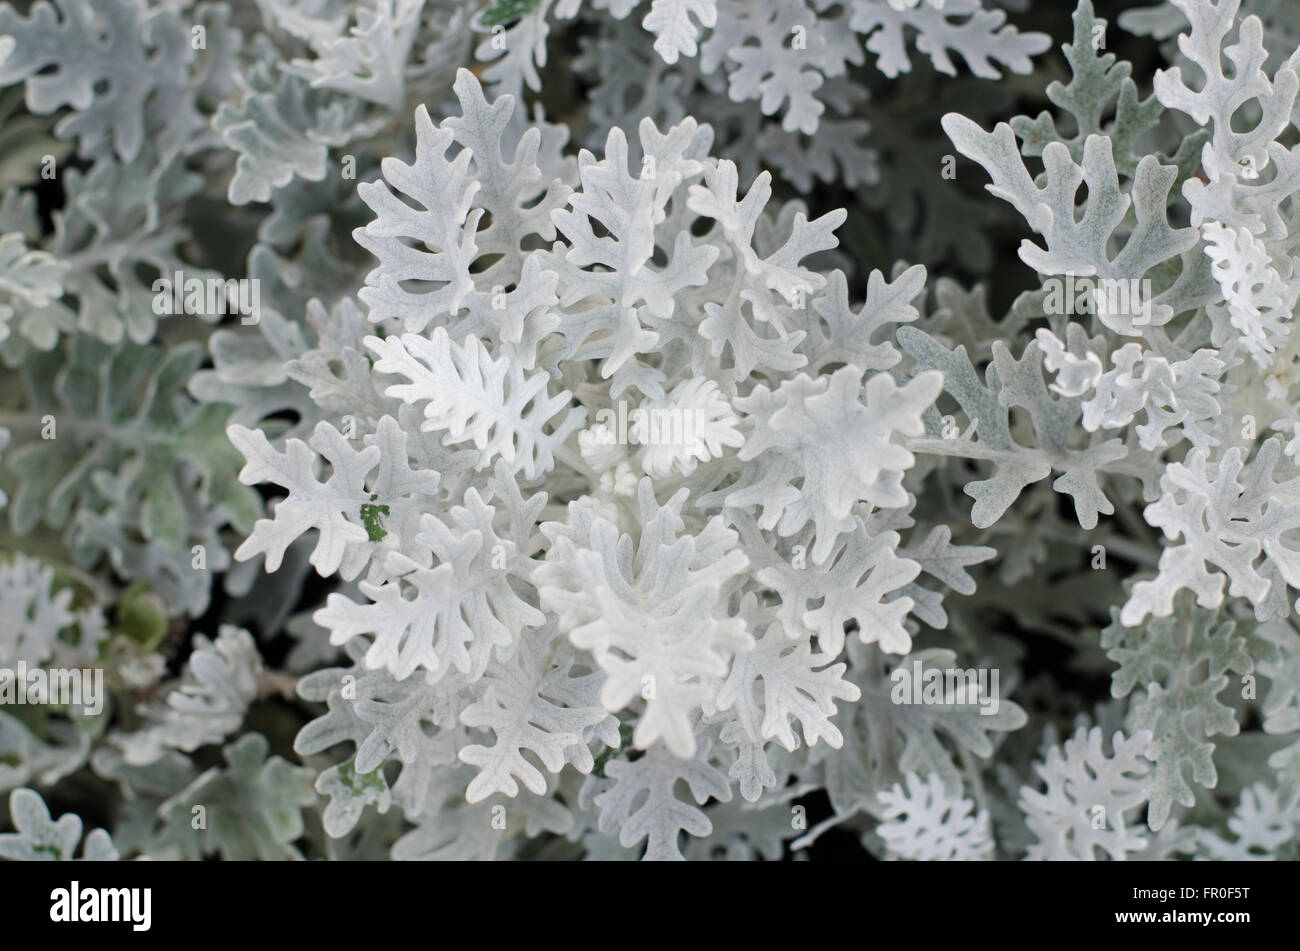 Top view of dusty miller plant Stock Photo